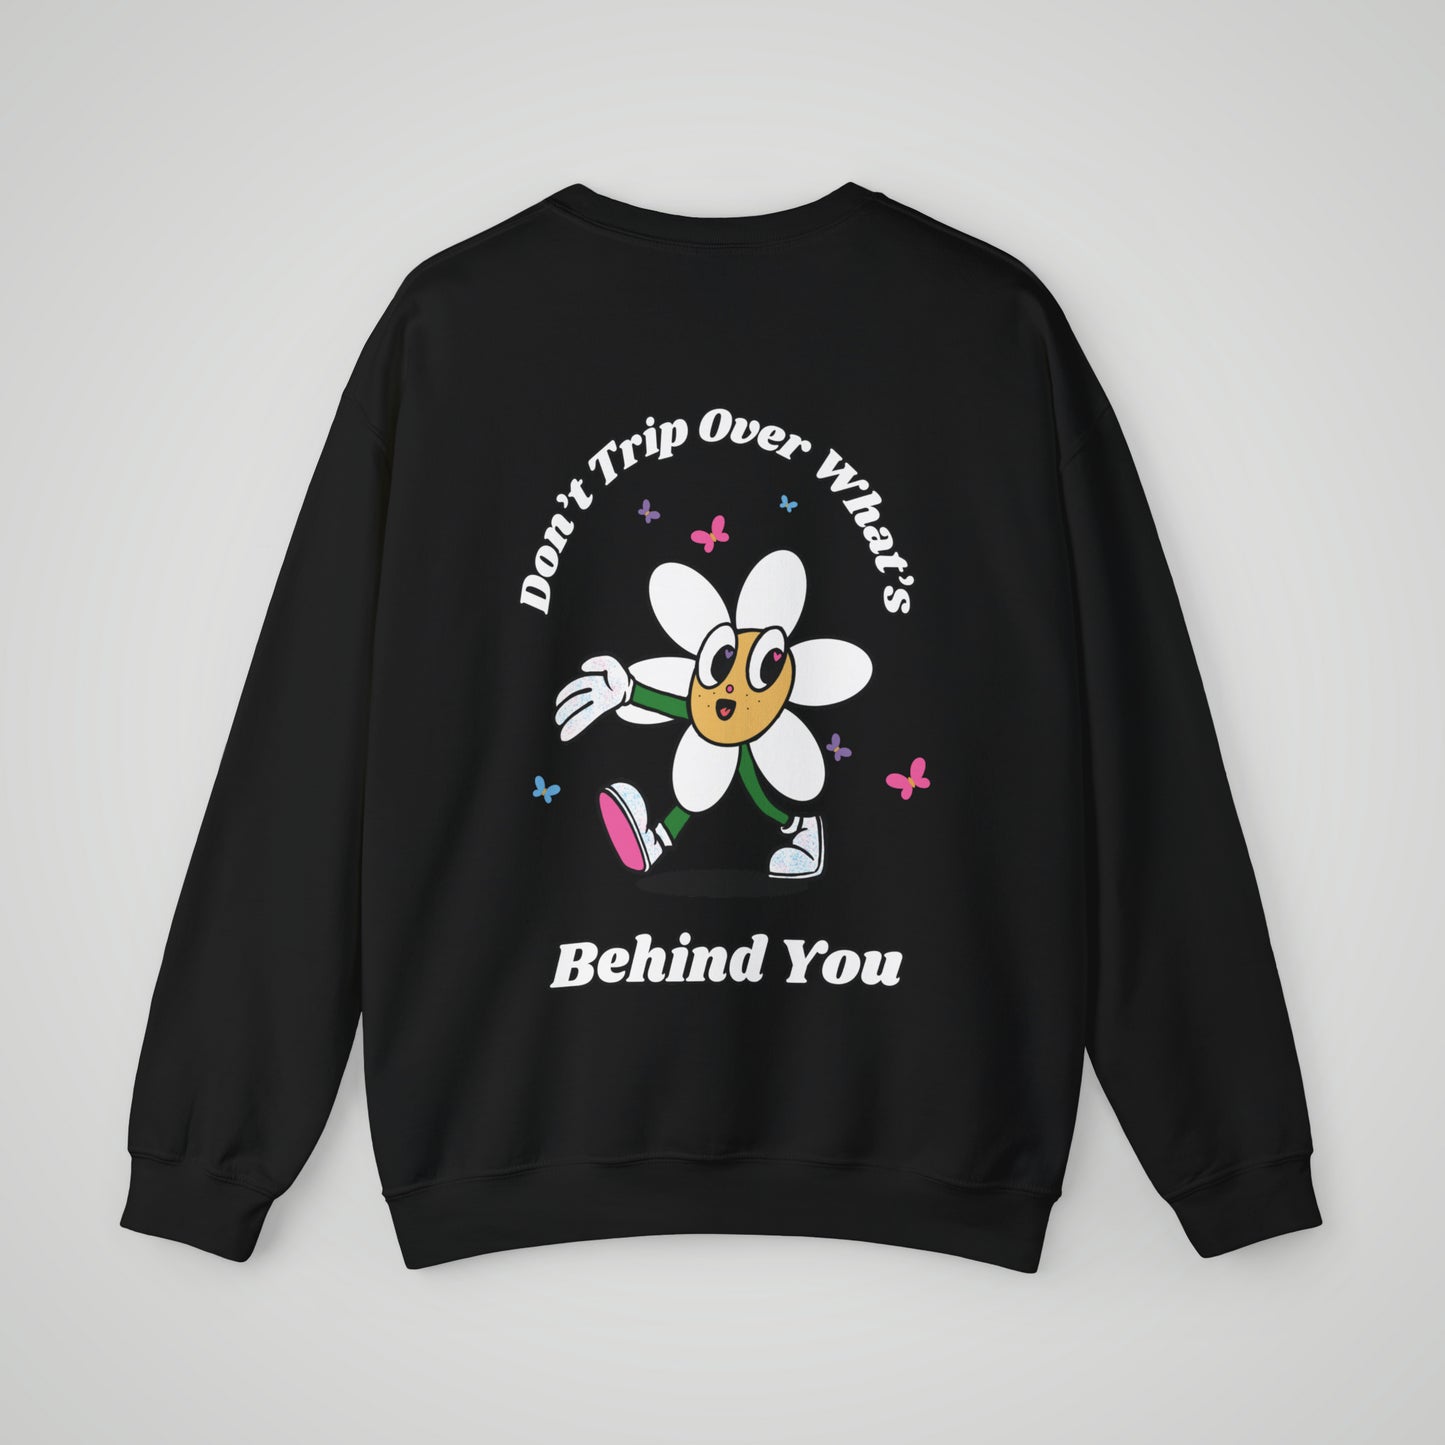 Don't Trip Over What's Behind You Sweatshirt